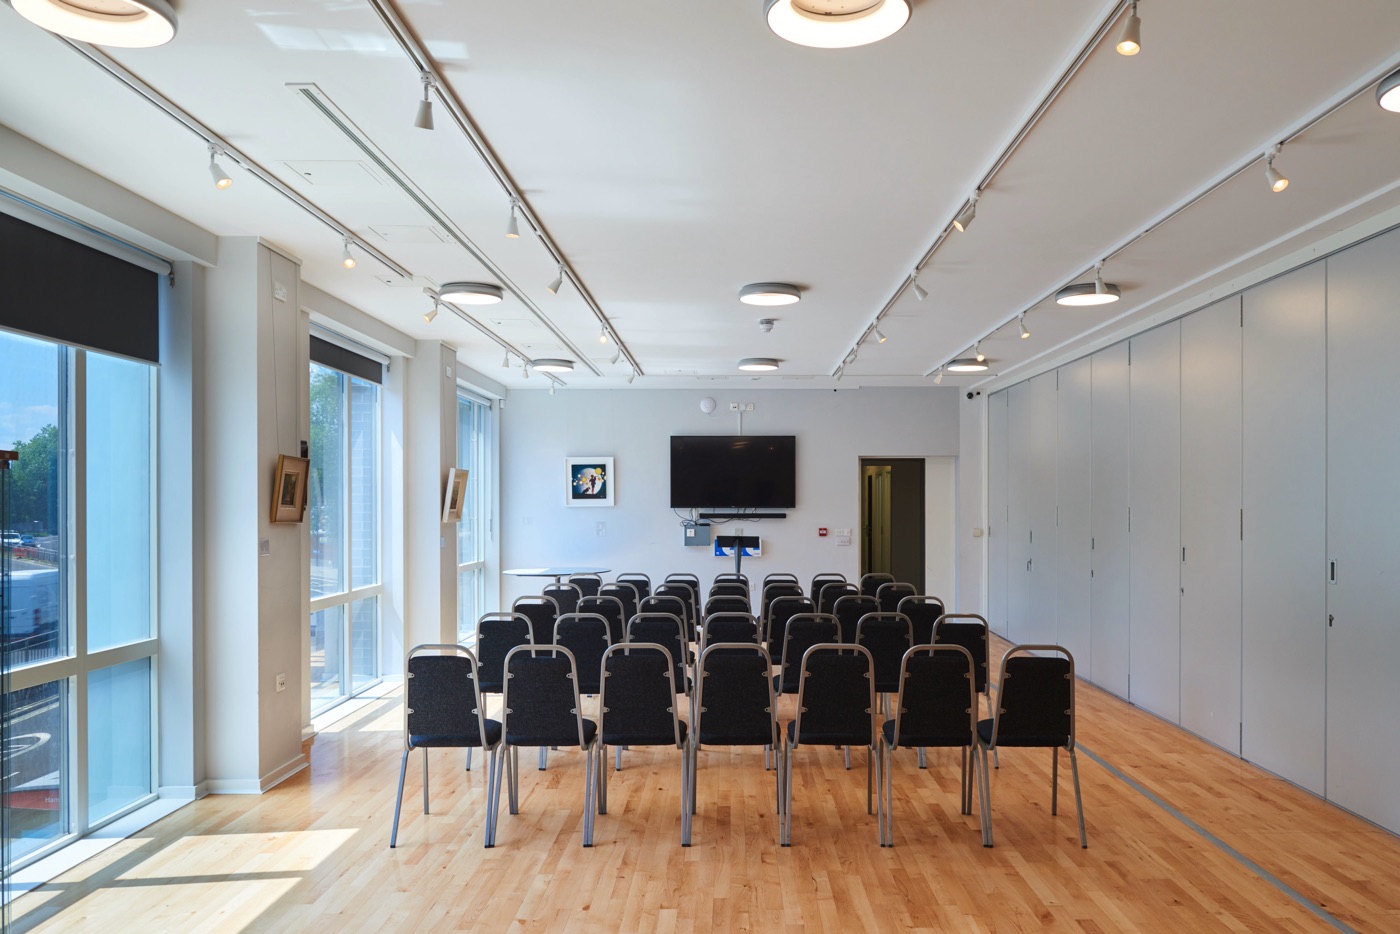 The mezzanine is a perfect room for hire in London for events and receptions.